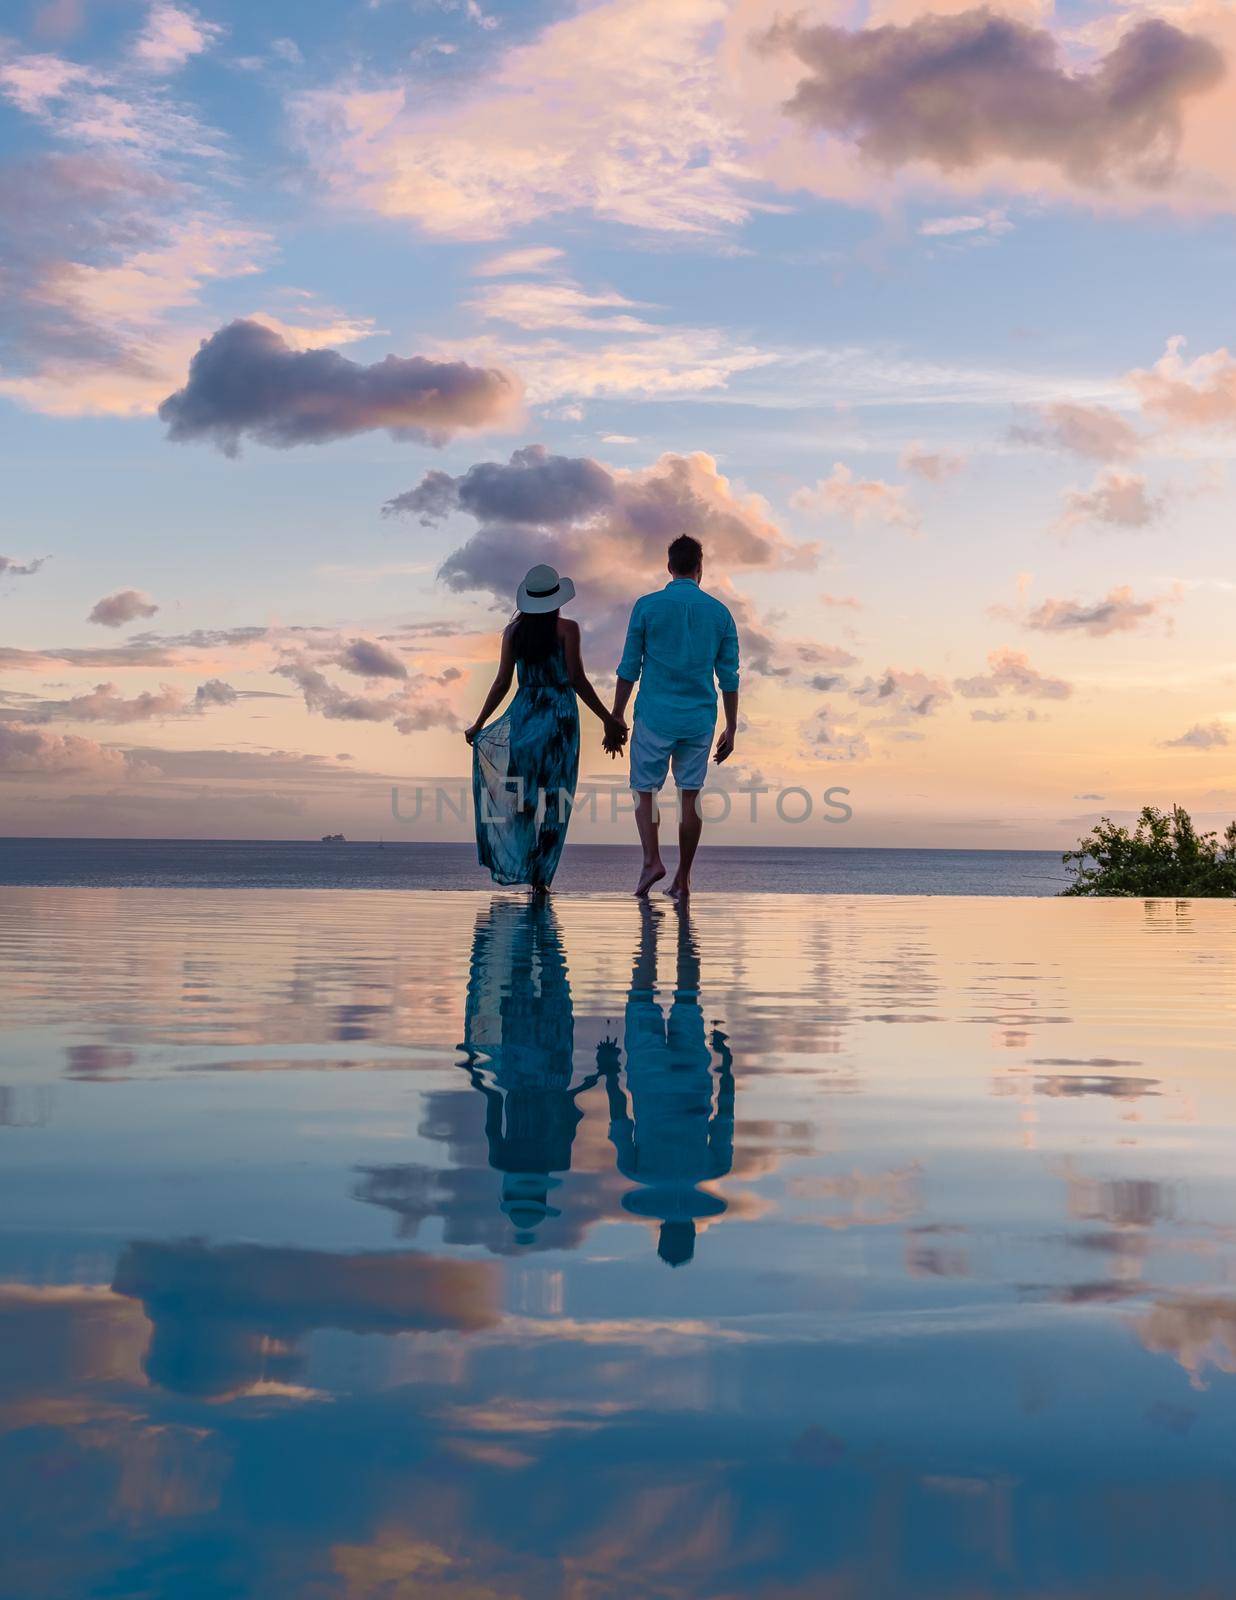 Young men and women watching the sunset with reflection in the infinity swimming pool at Saint Lucia Caribbean, couple at infinity pool during sunset